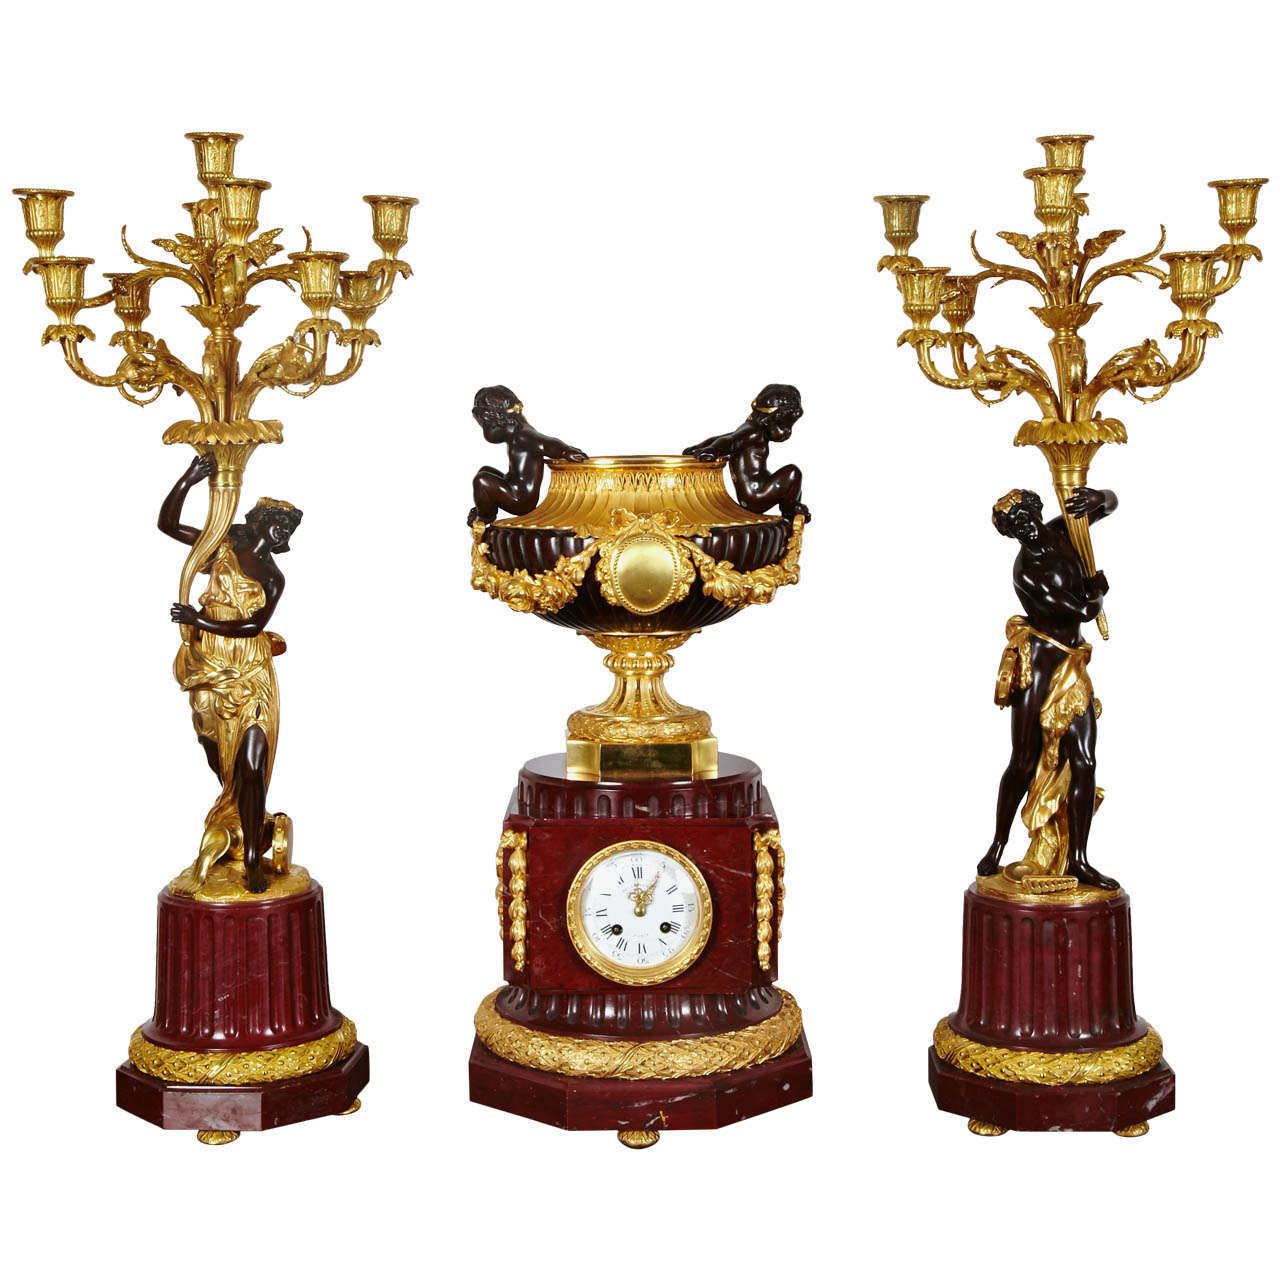 Gorgeous mantel clock with candelabras signed Delafontaine. For Sale